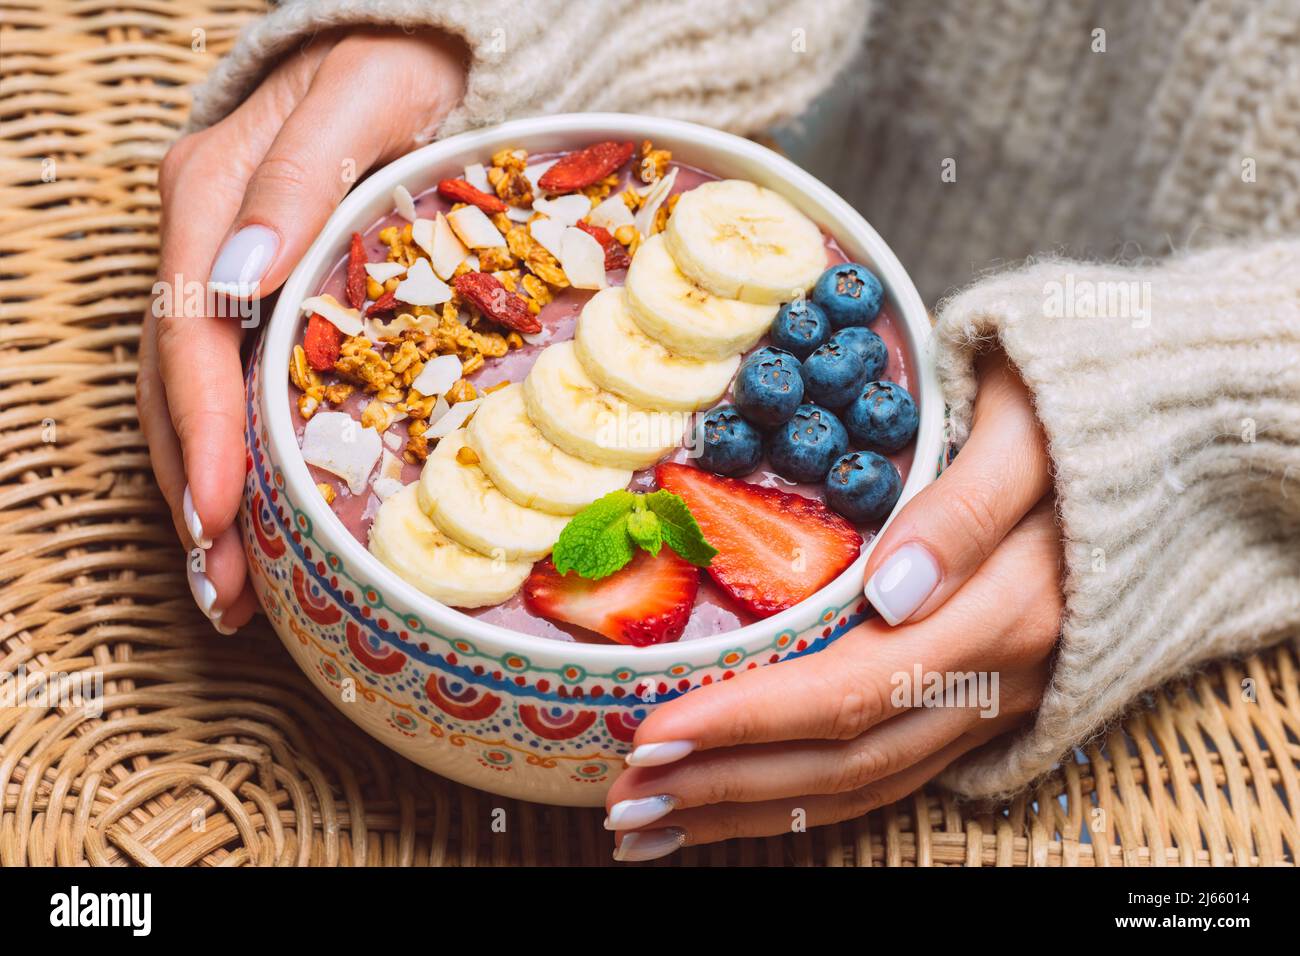 Woman hands holding fresh fruit acai smoothie bowl. Healthy vegan smoothie bowl with banana, strawberry, blueberry and granola. Stock Photo